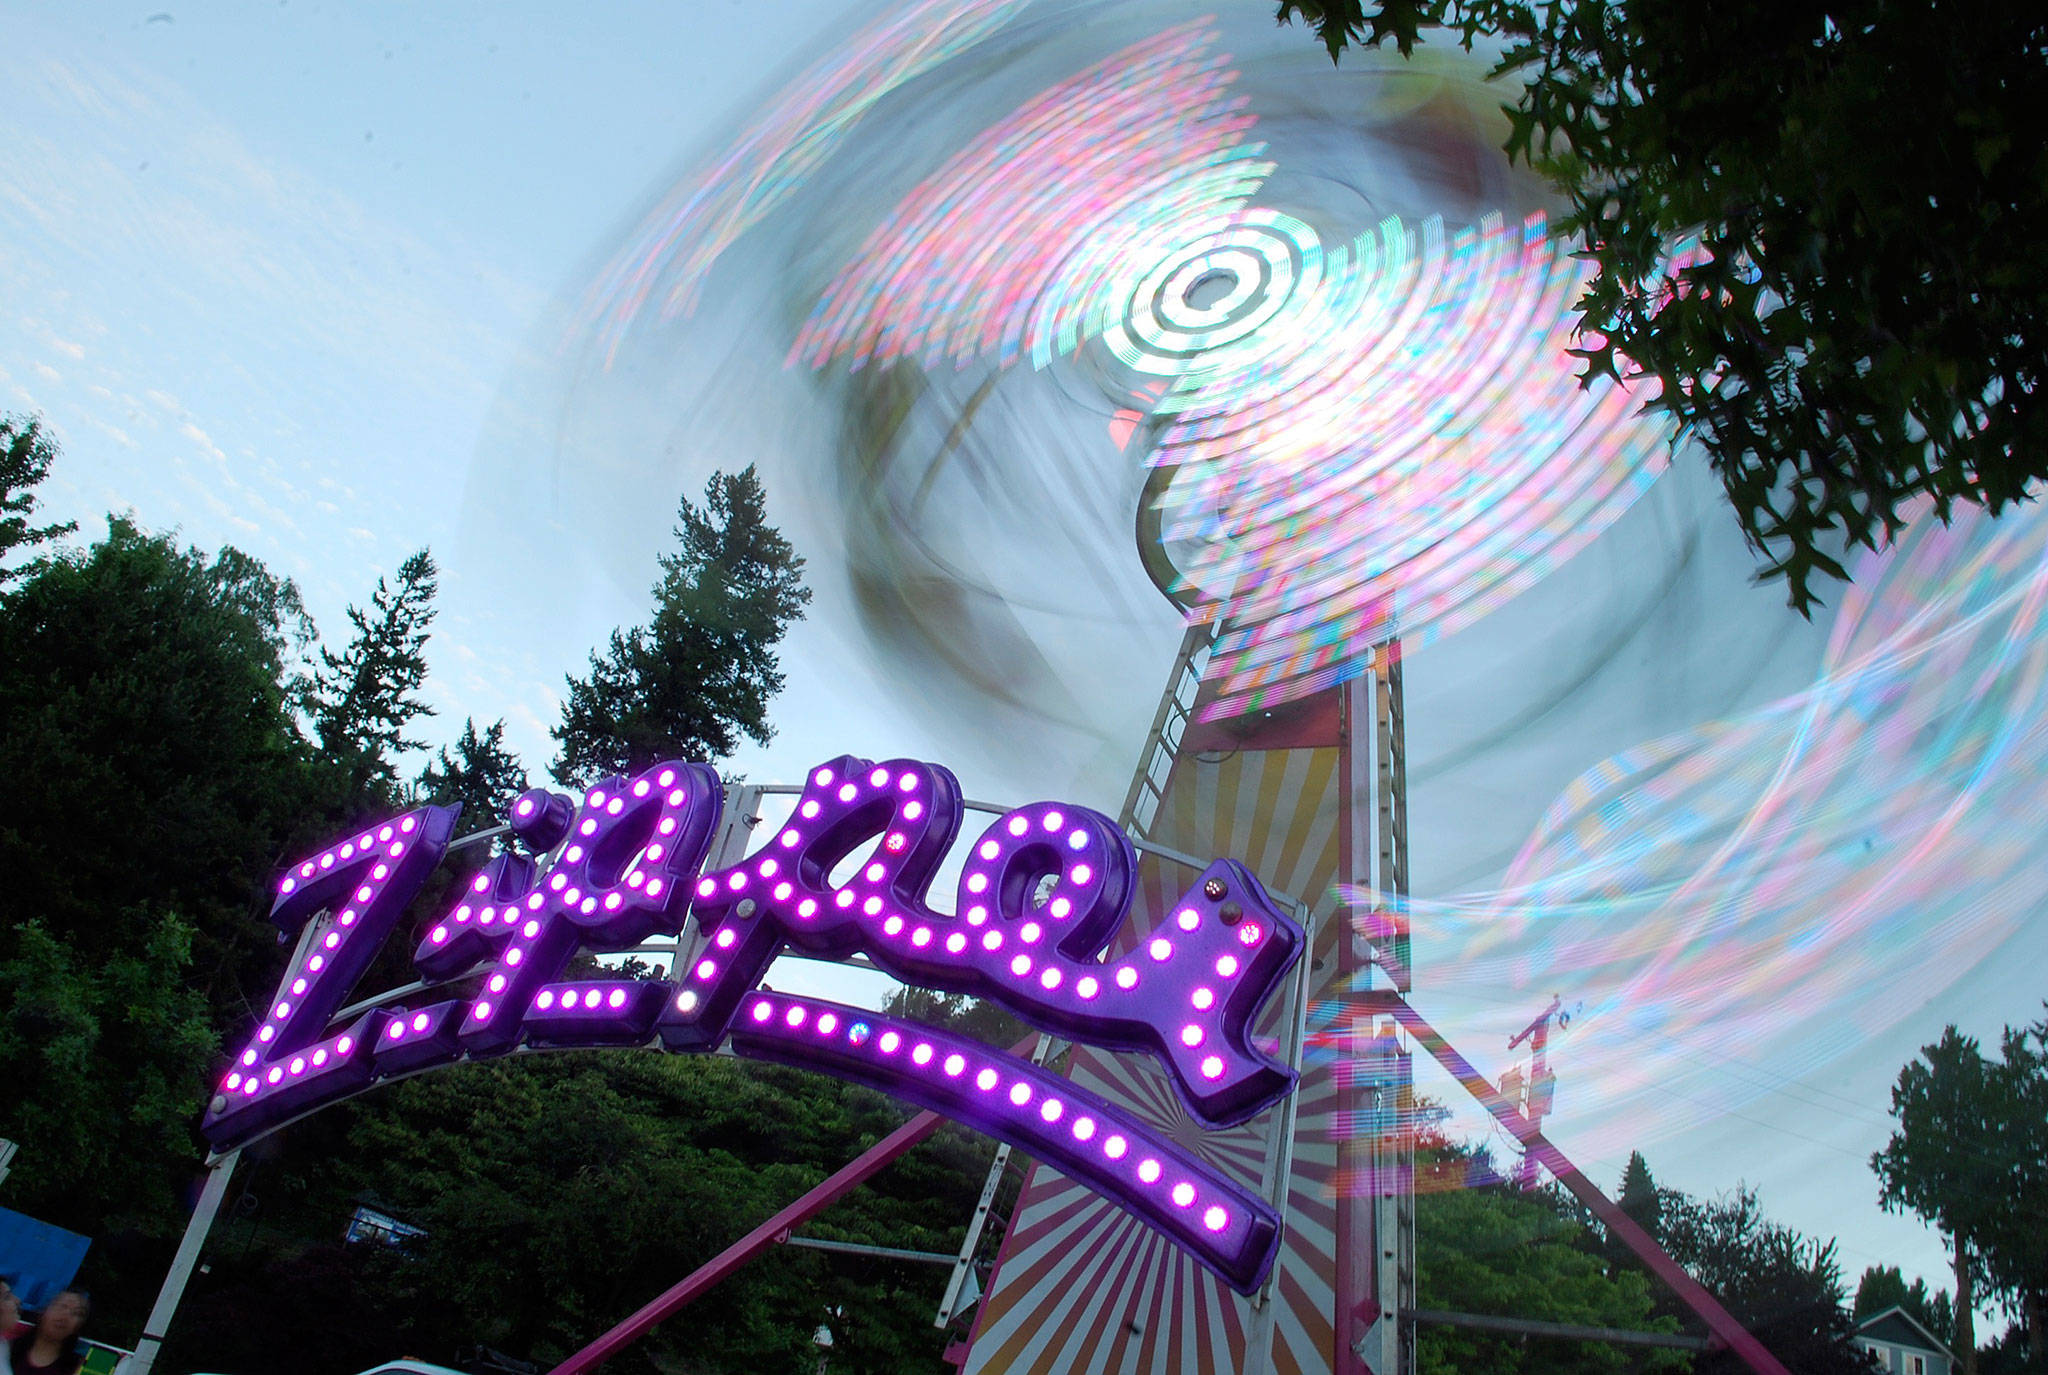 The Fathoms O’ Fun Carnival’s Zipper ride was awash in color as dusk fell on the Port Orchard waterfront. Photo: Bob Smith | Kitsap Daily News